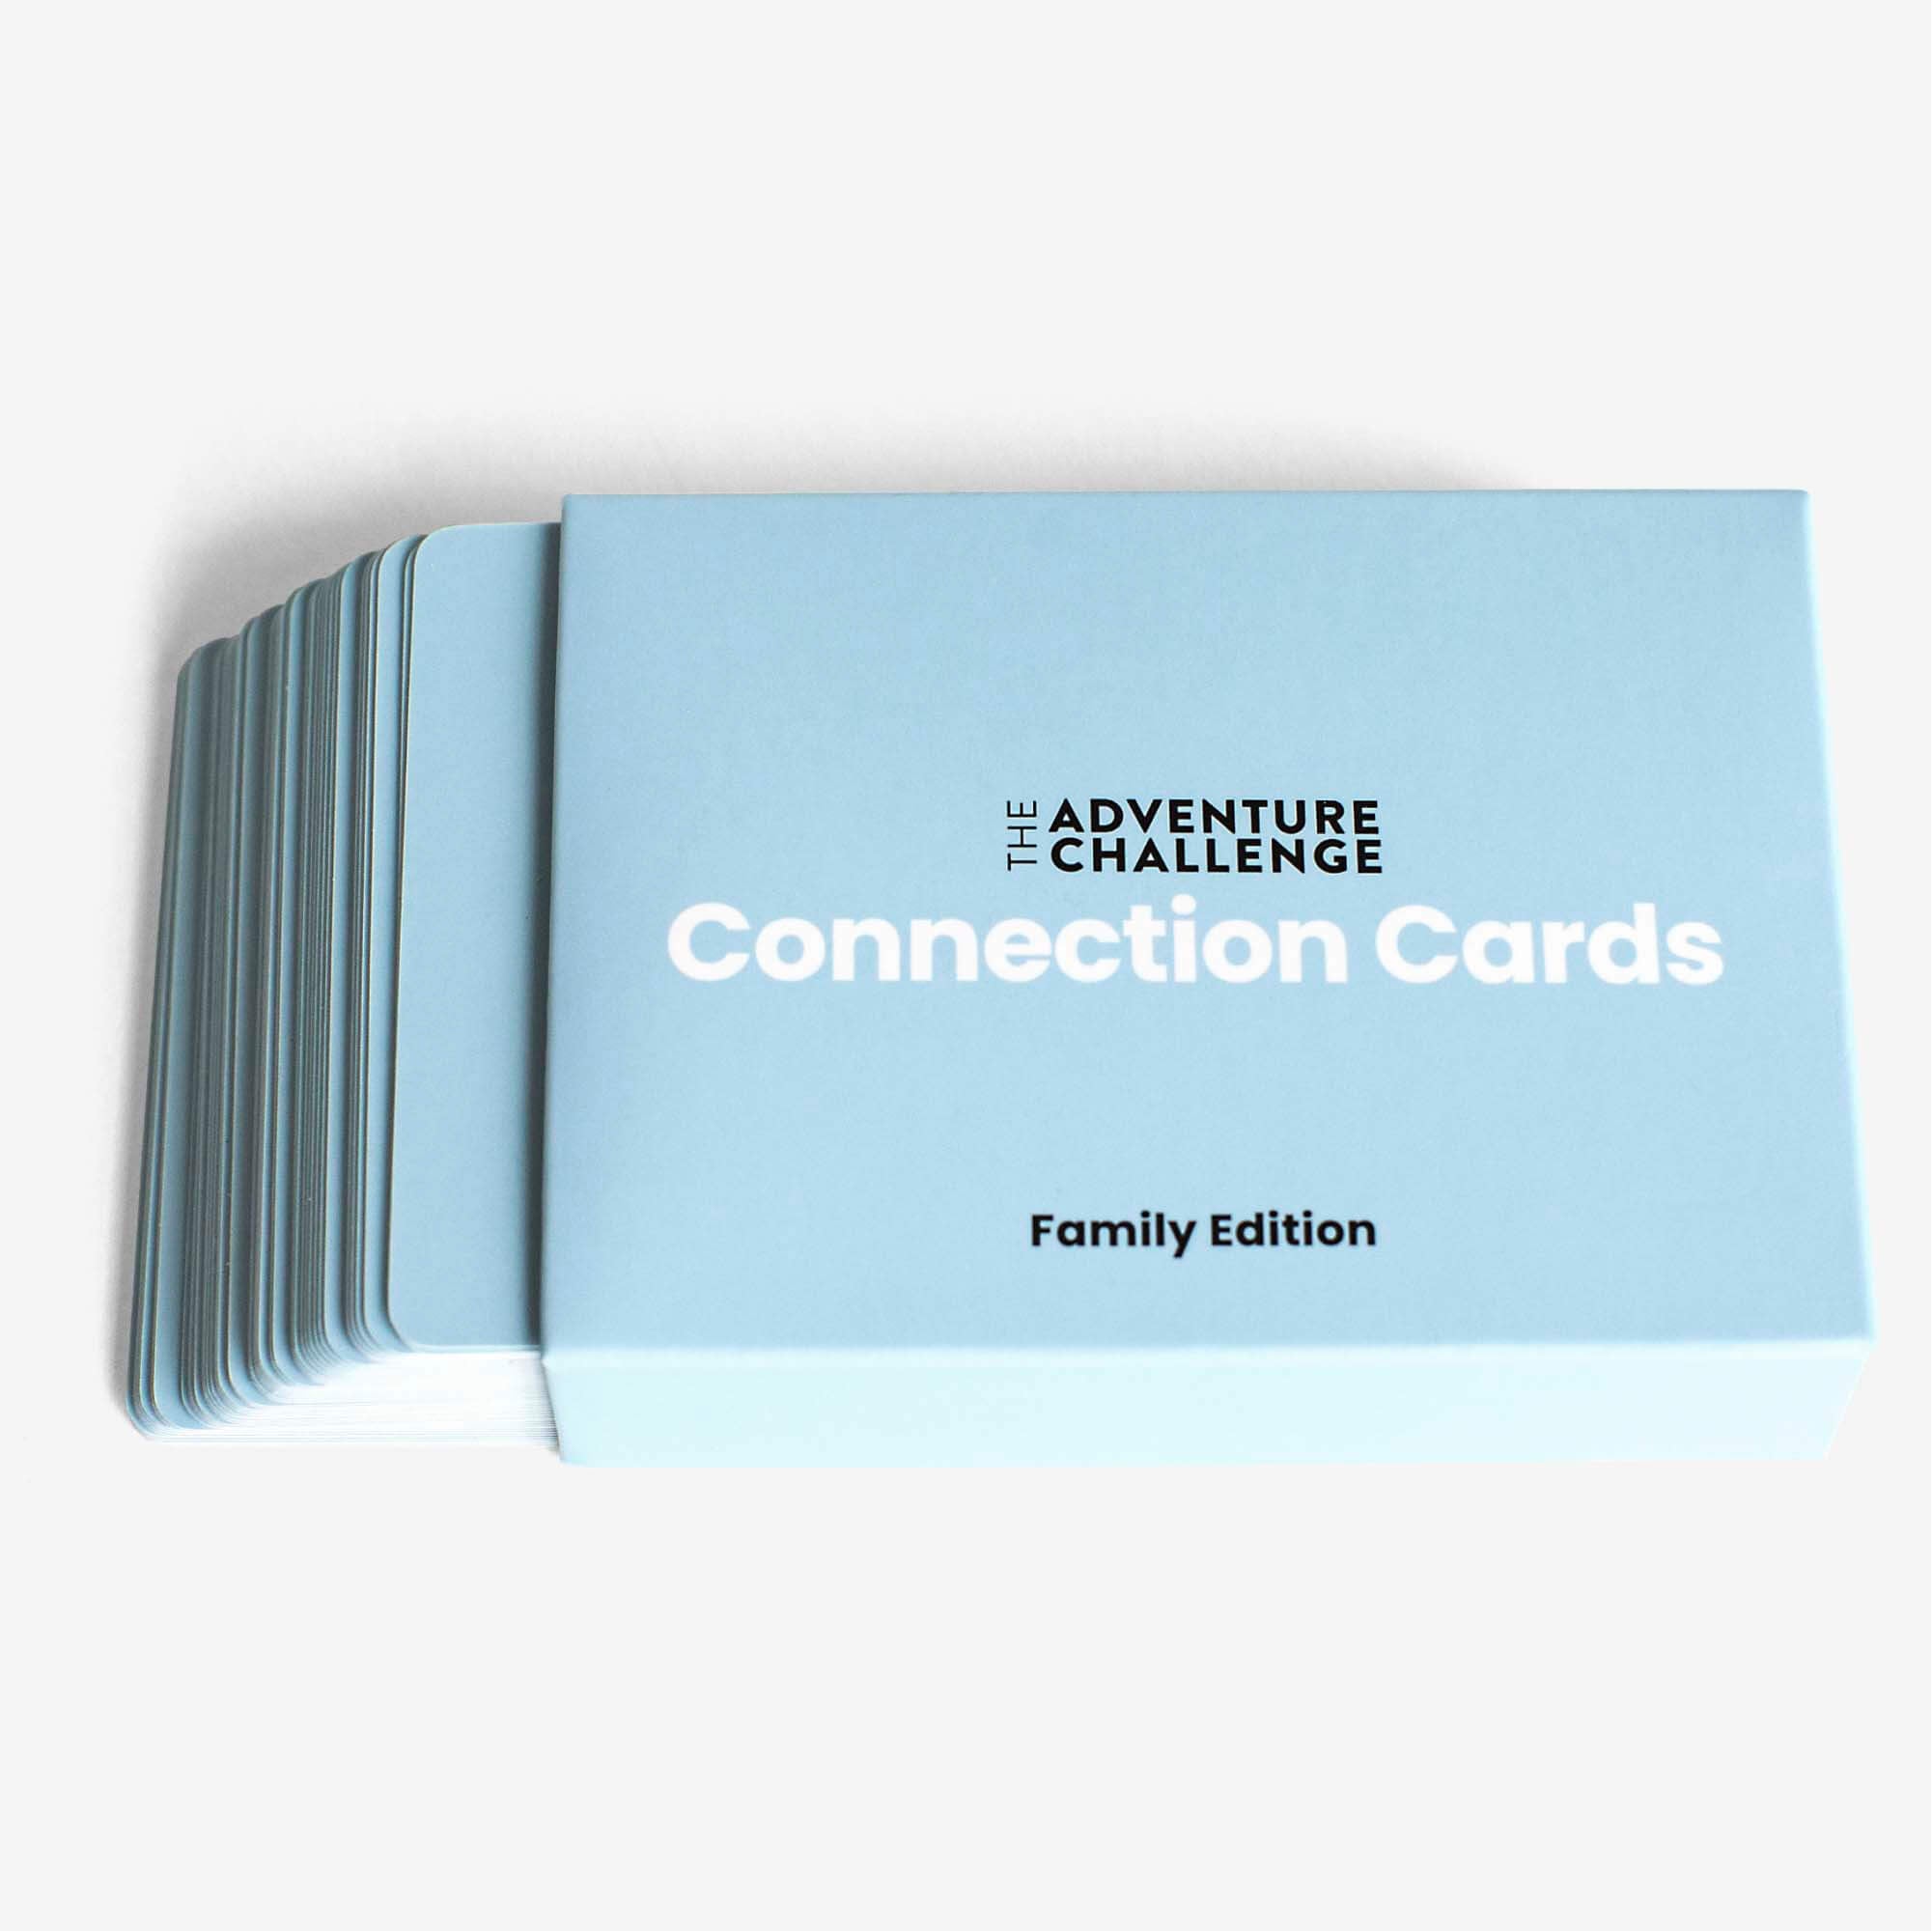 Family Edition and Connection Cards | Family Edition Bundle